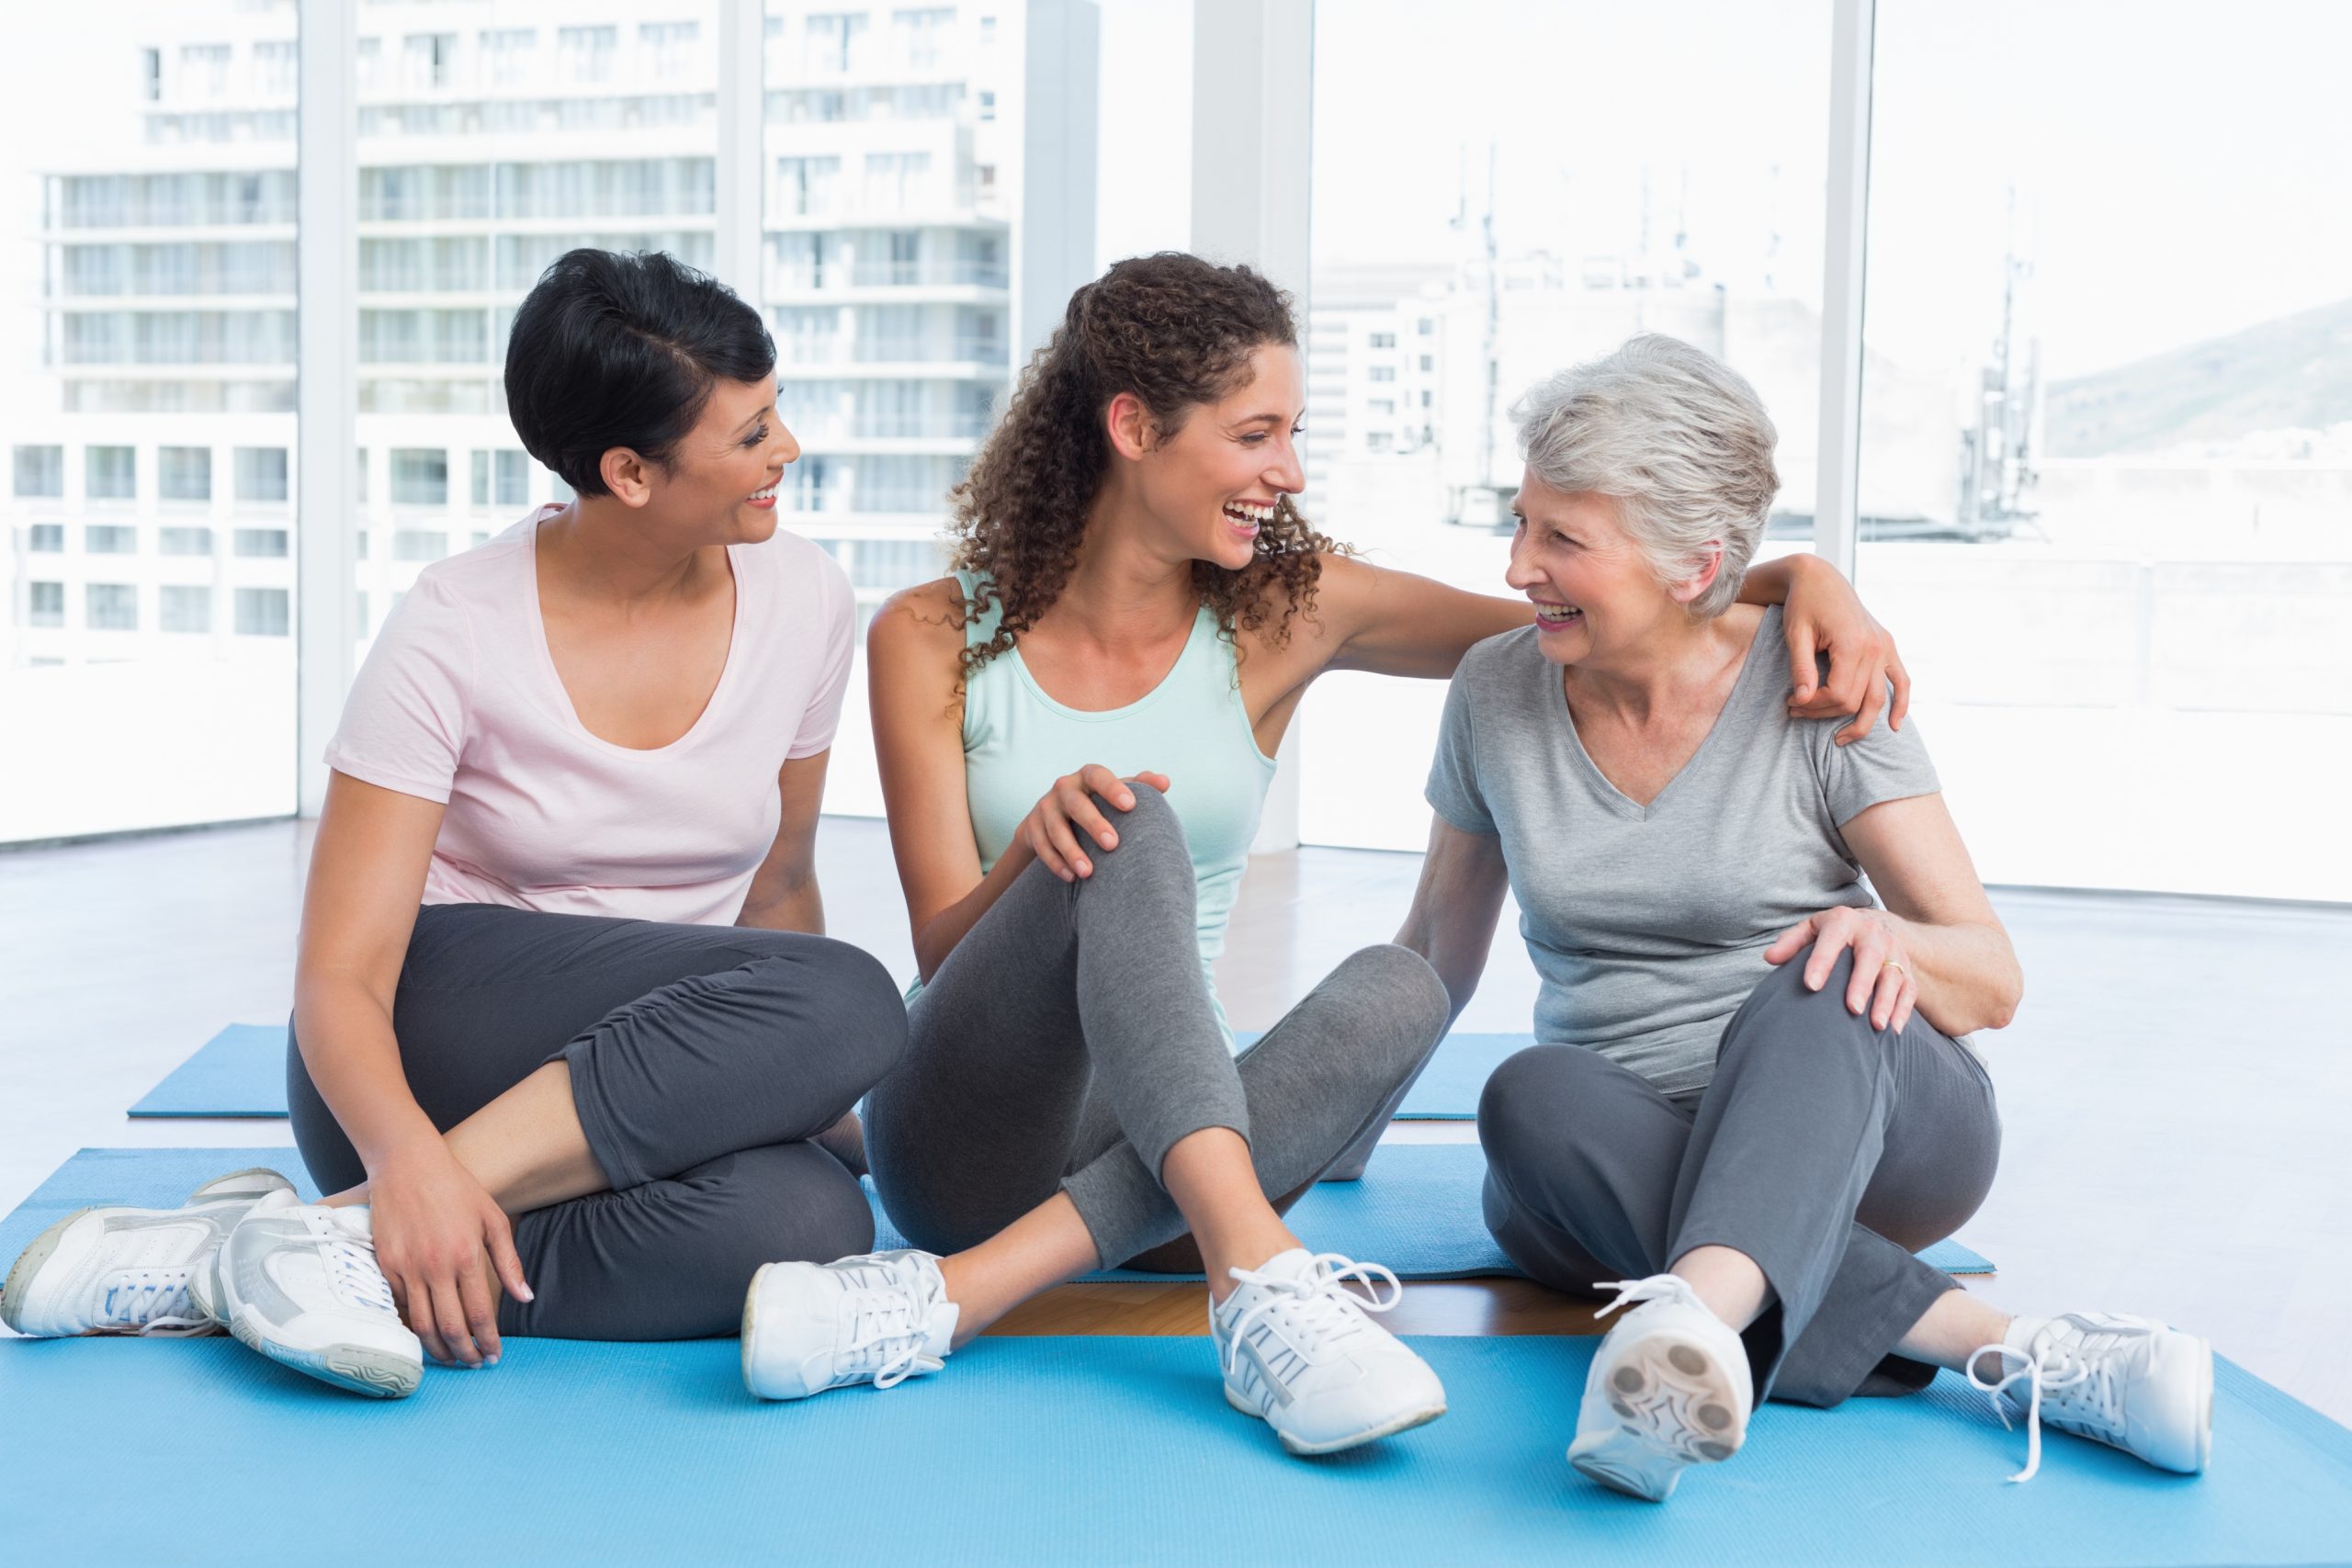 Pelvic Floor Physiotherapy Singapore Safely Alleviates Discomfort